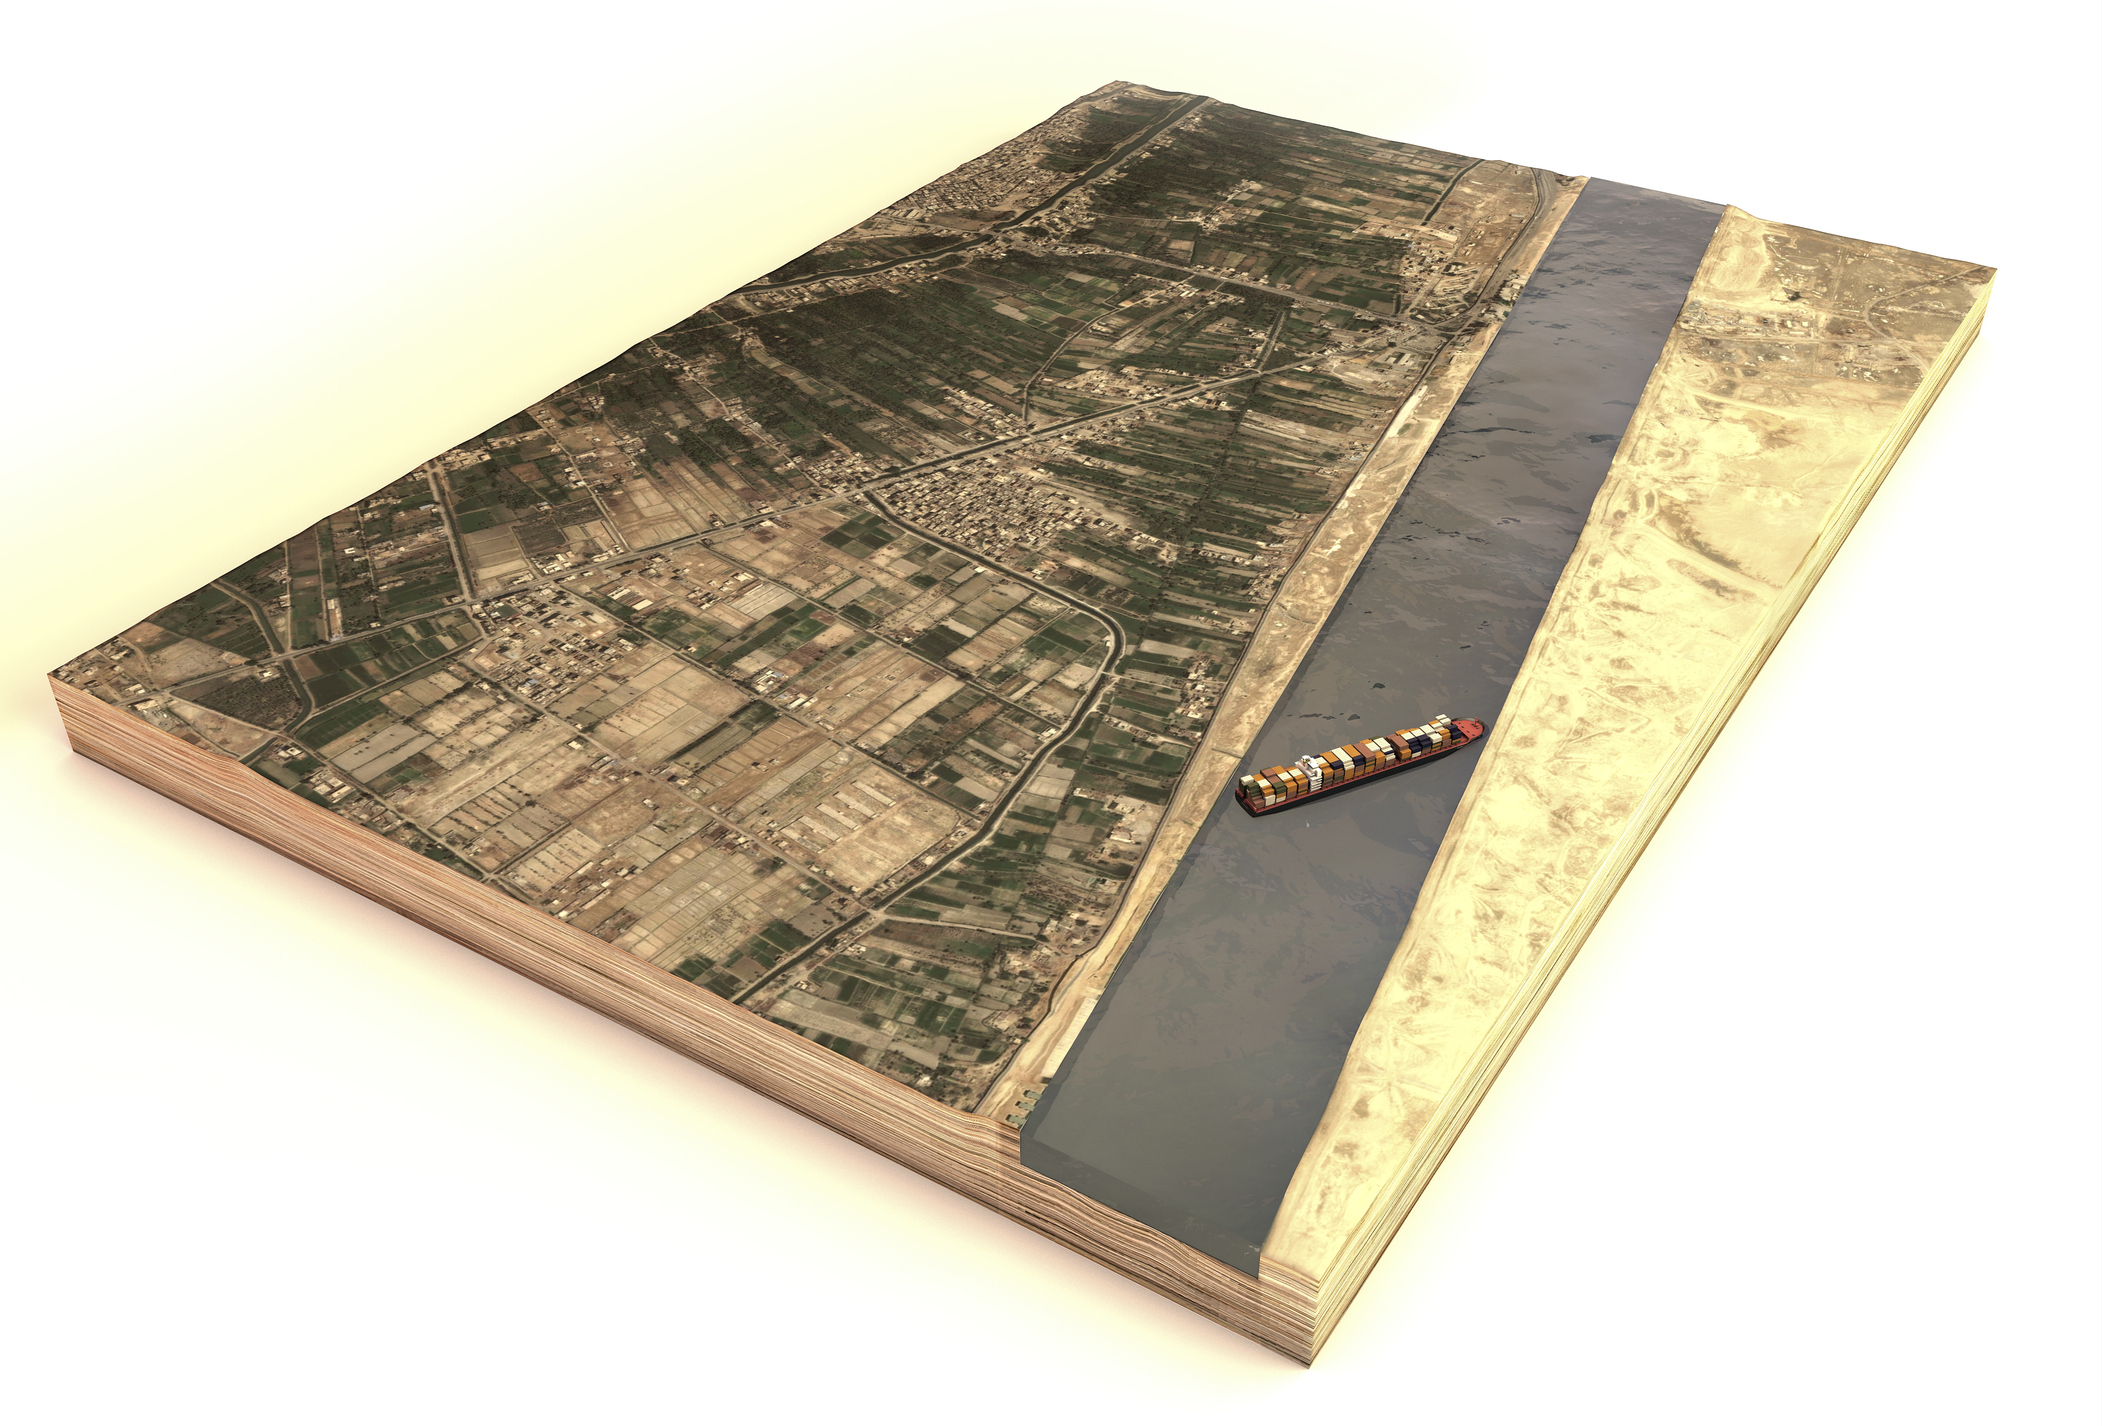 Satellite view of the Suez Canal. Reconstruction of the container ship stranded in the canal. 